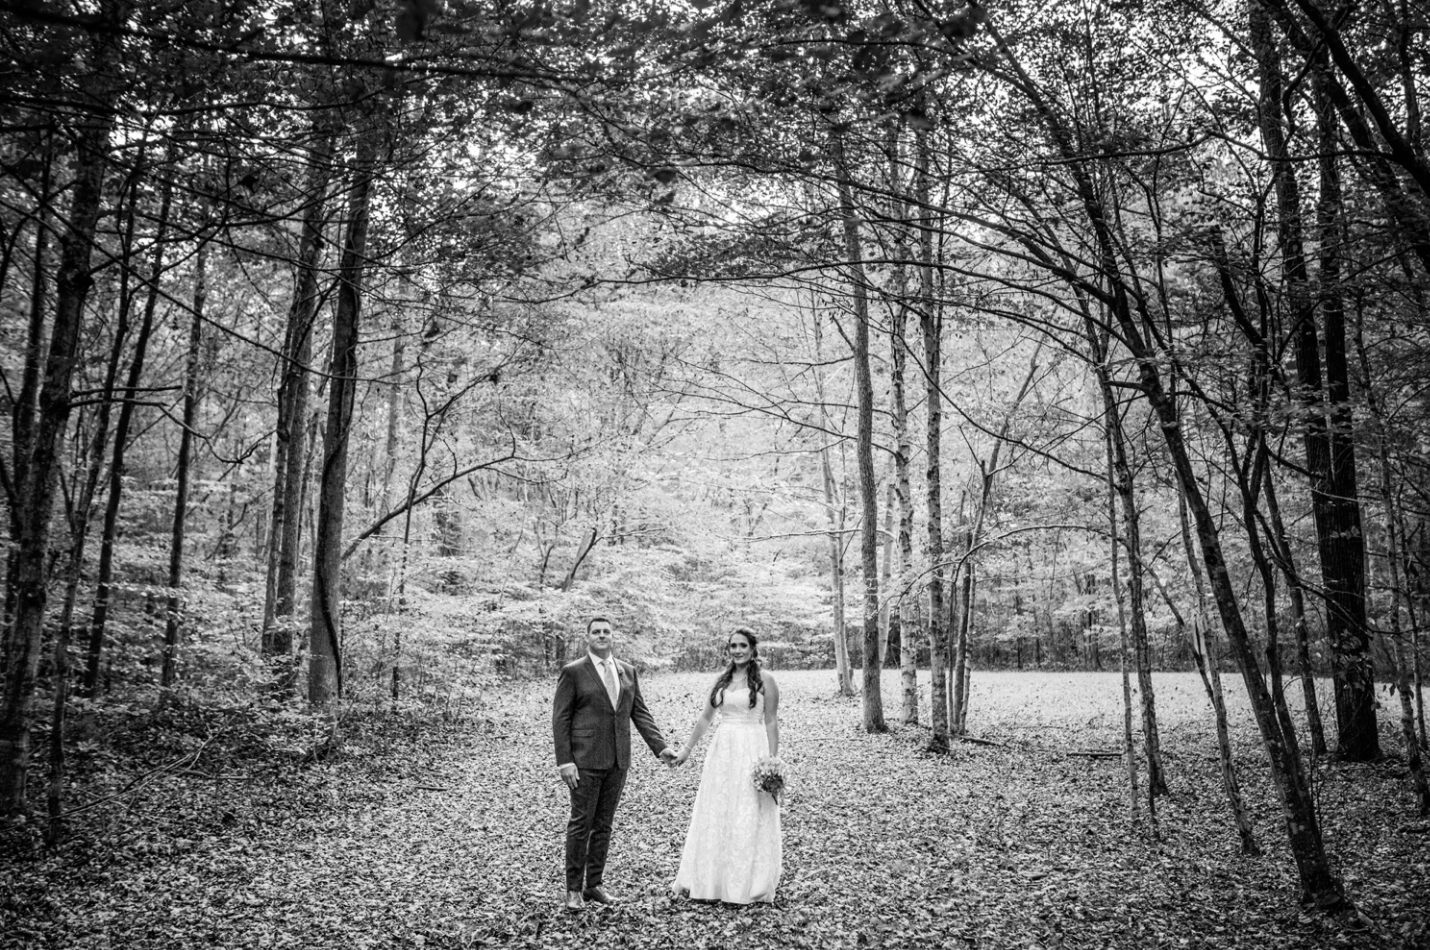 The bride and groom stand amongst a wooded background at Garrett Farm.